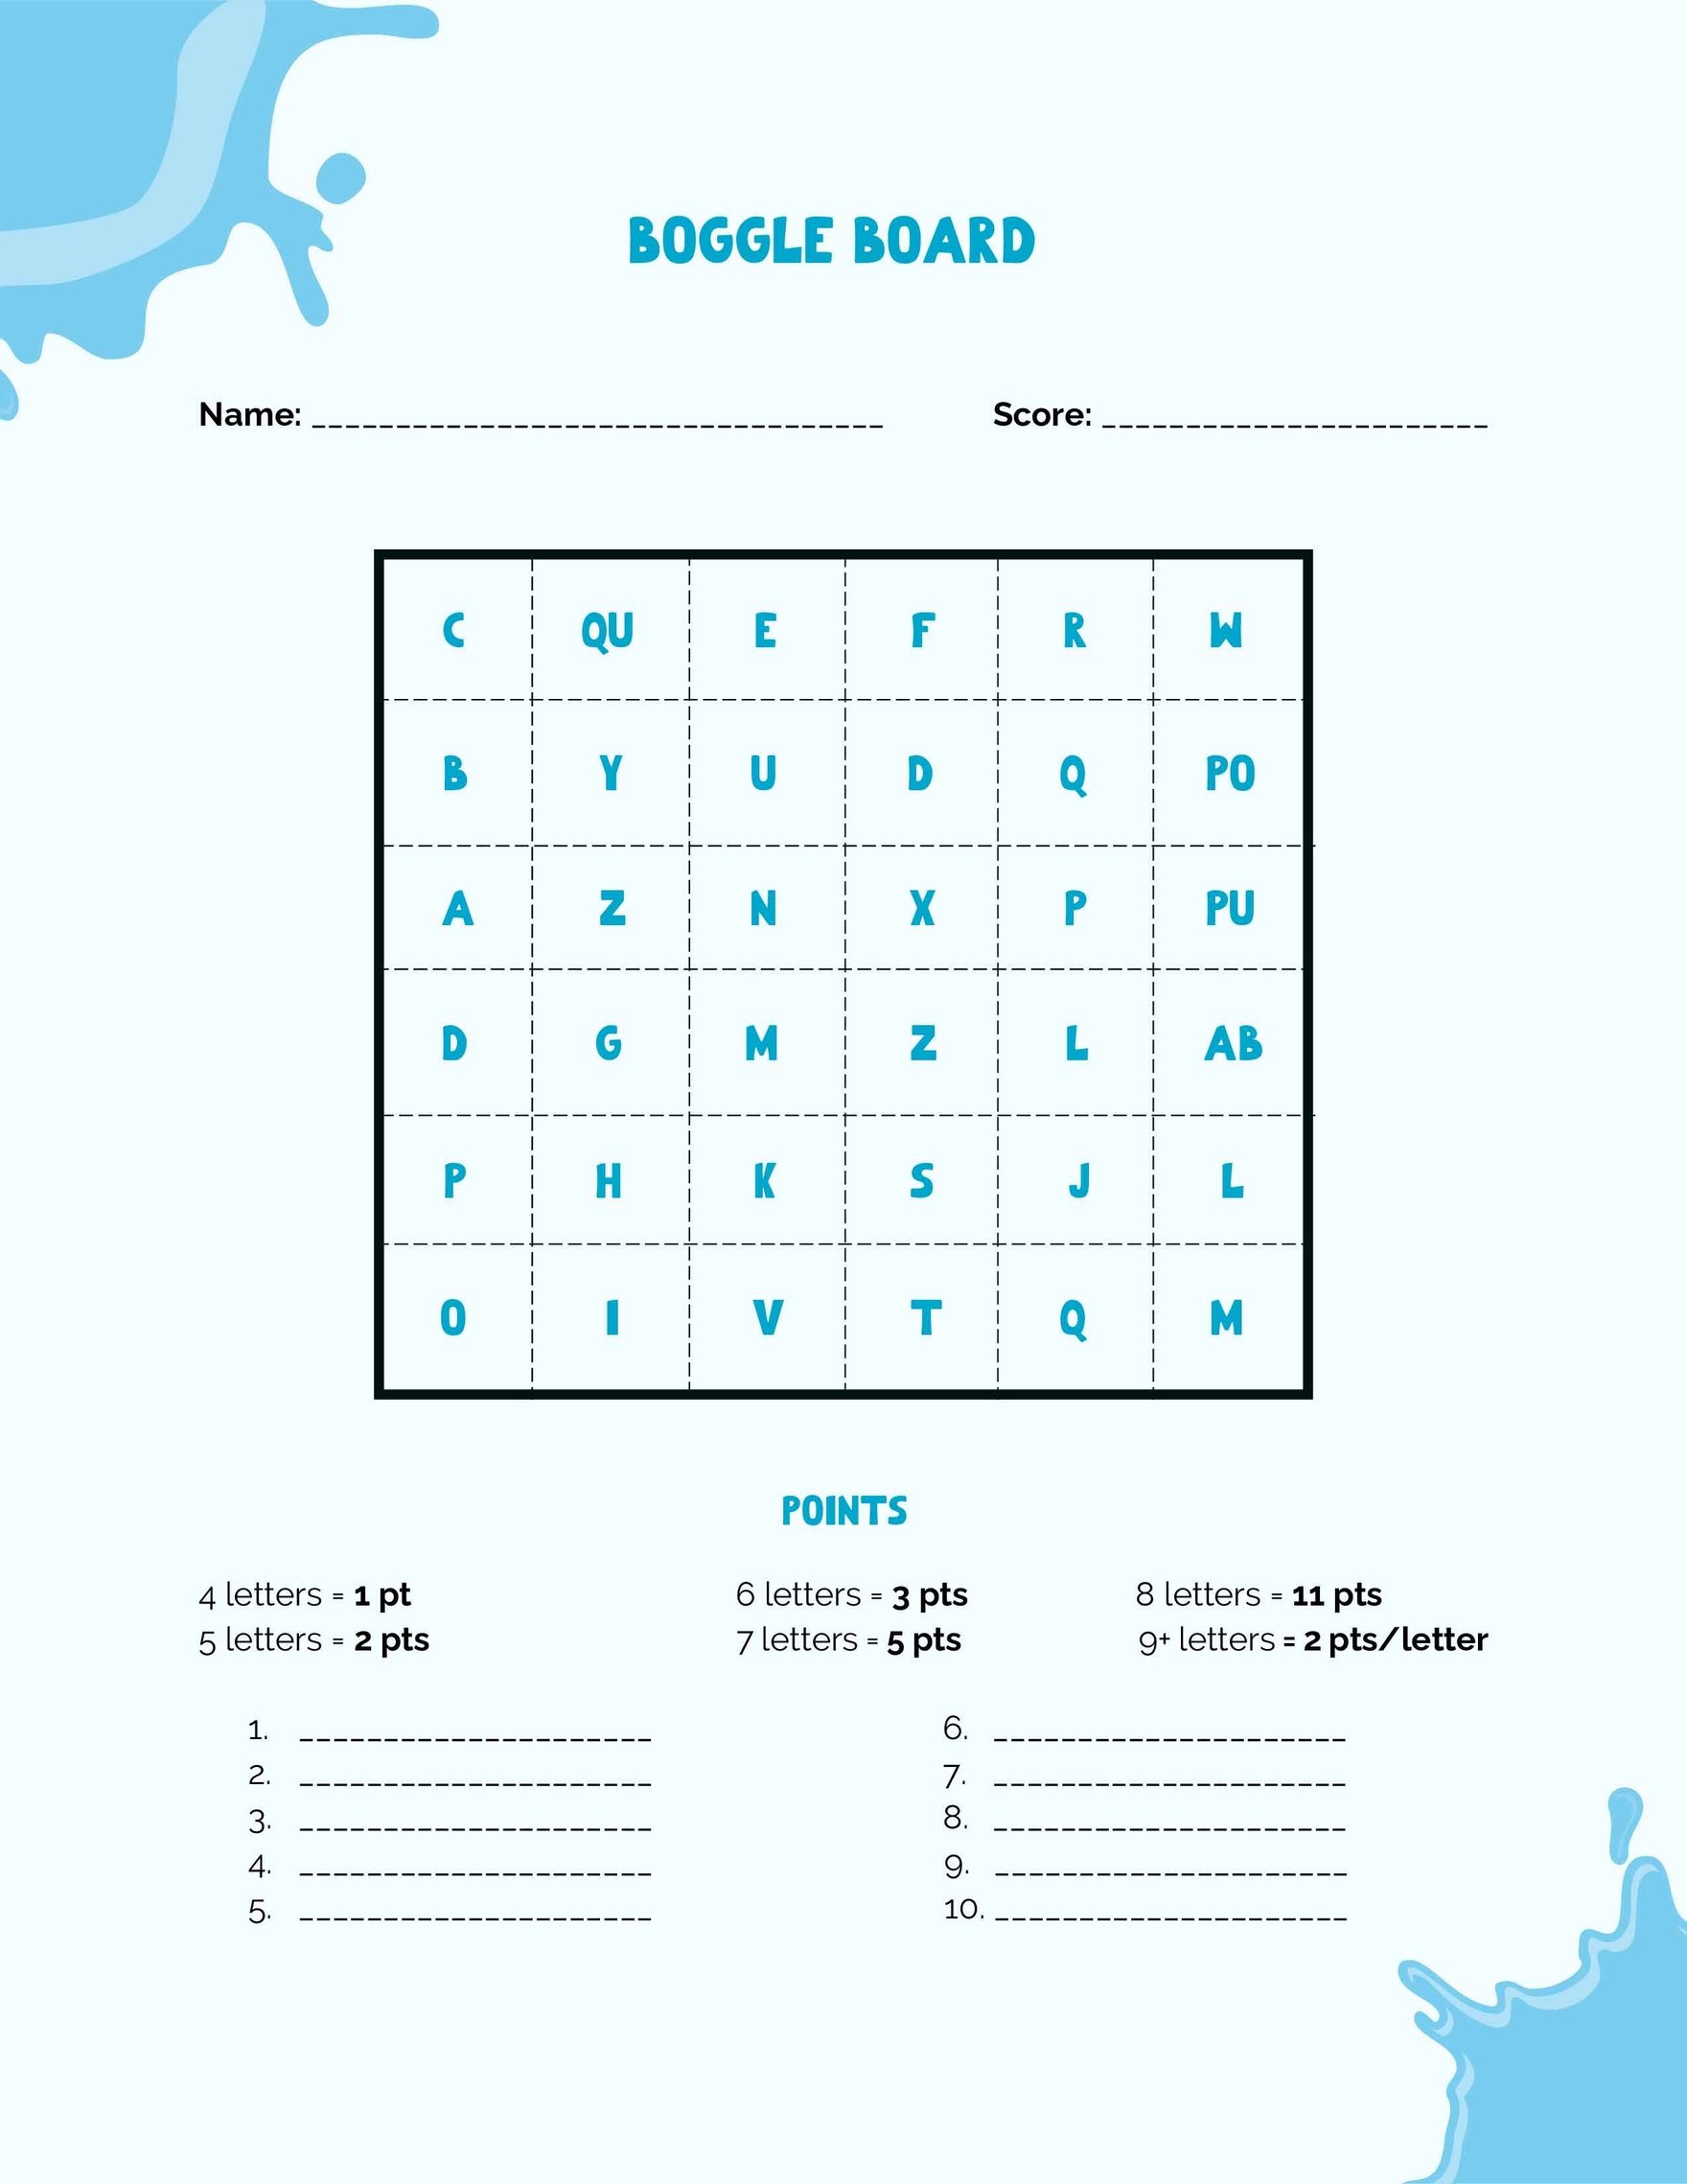 boggle-bulletin-board-template-google-docs-word-apple-pages-pdf